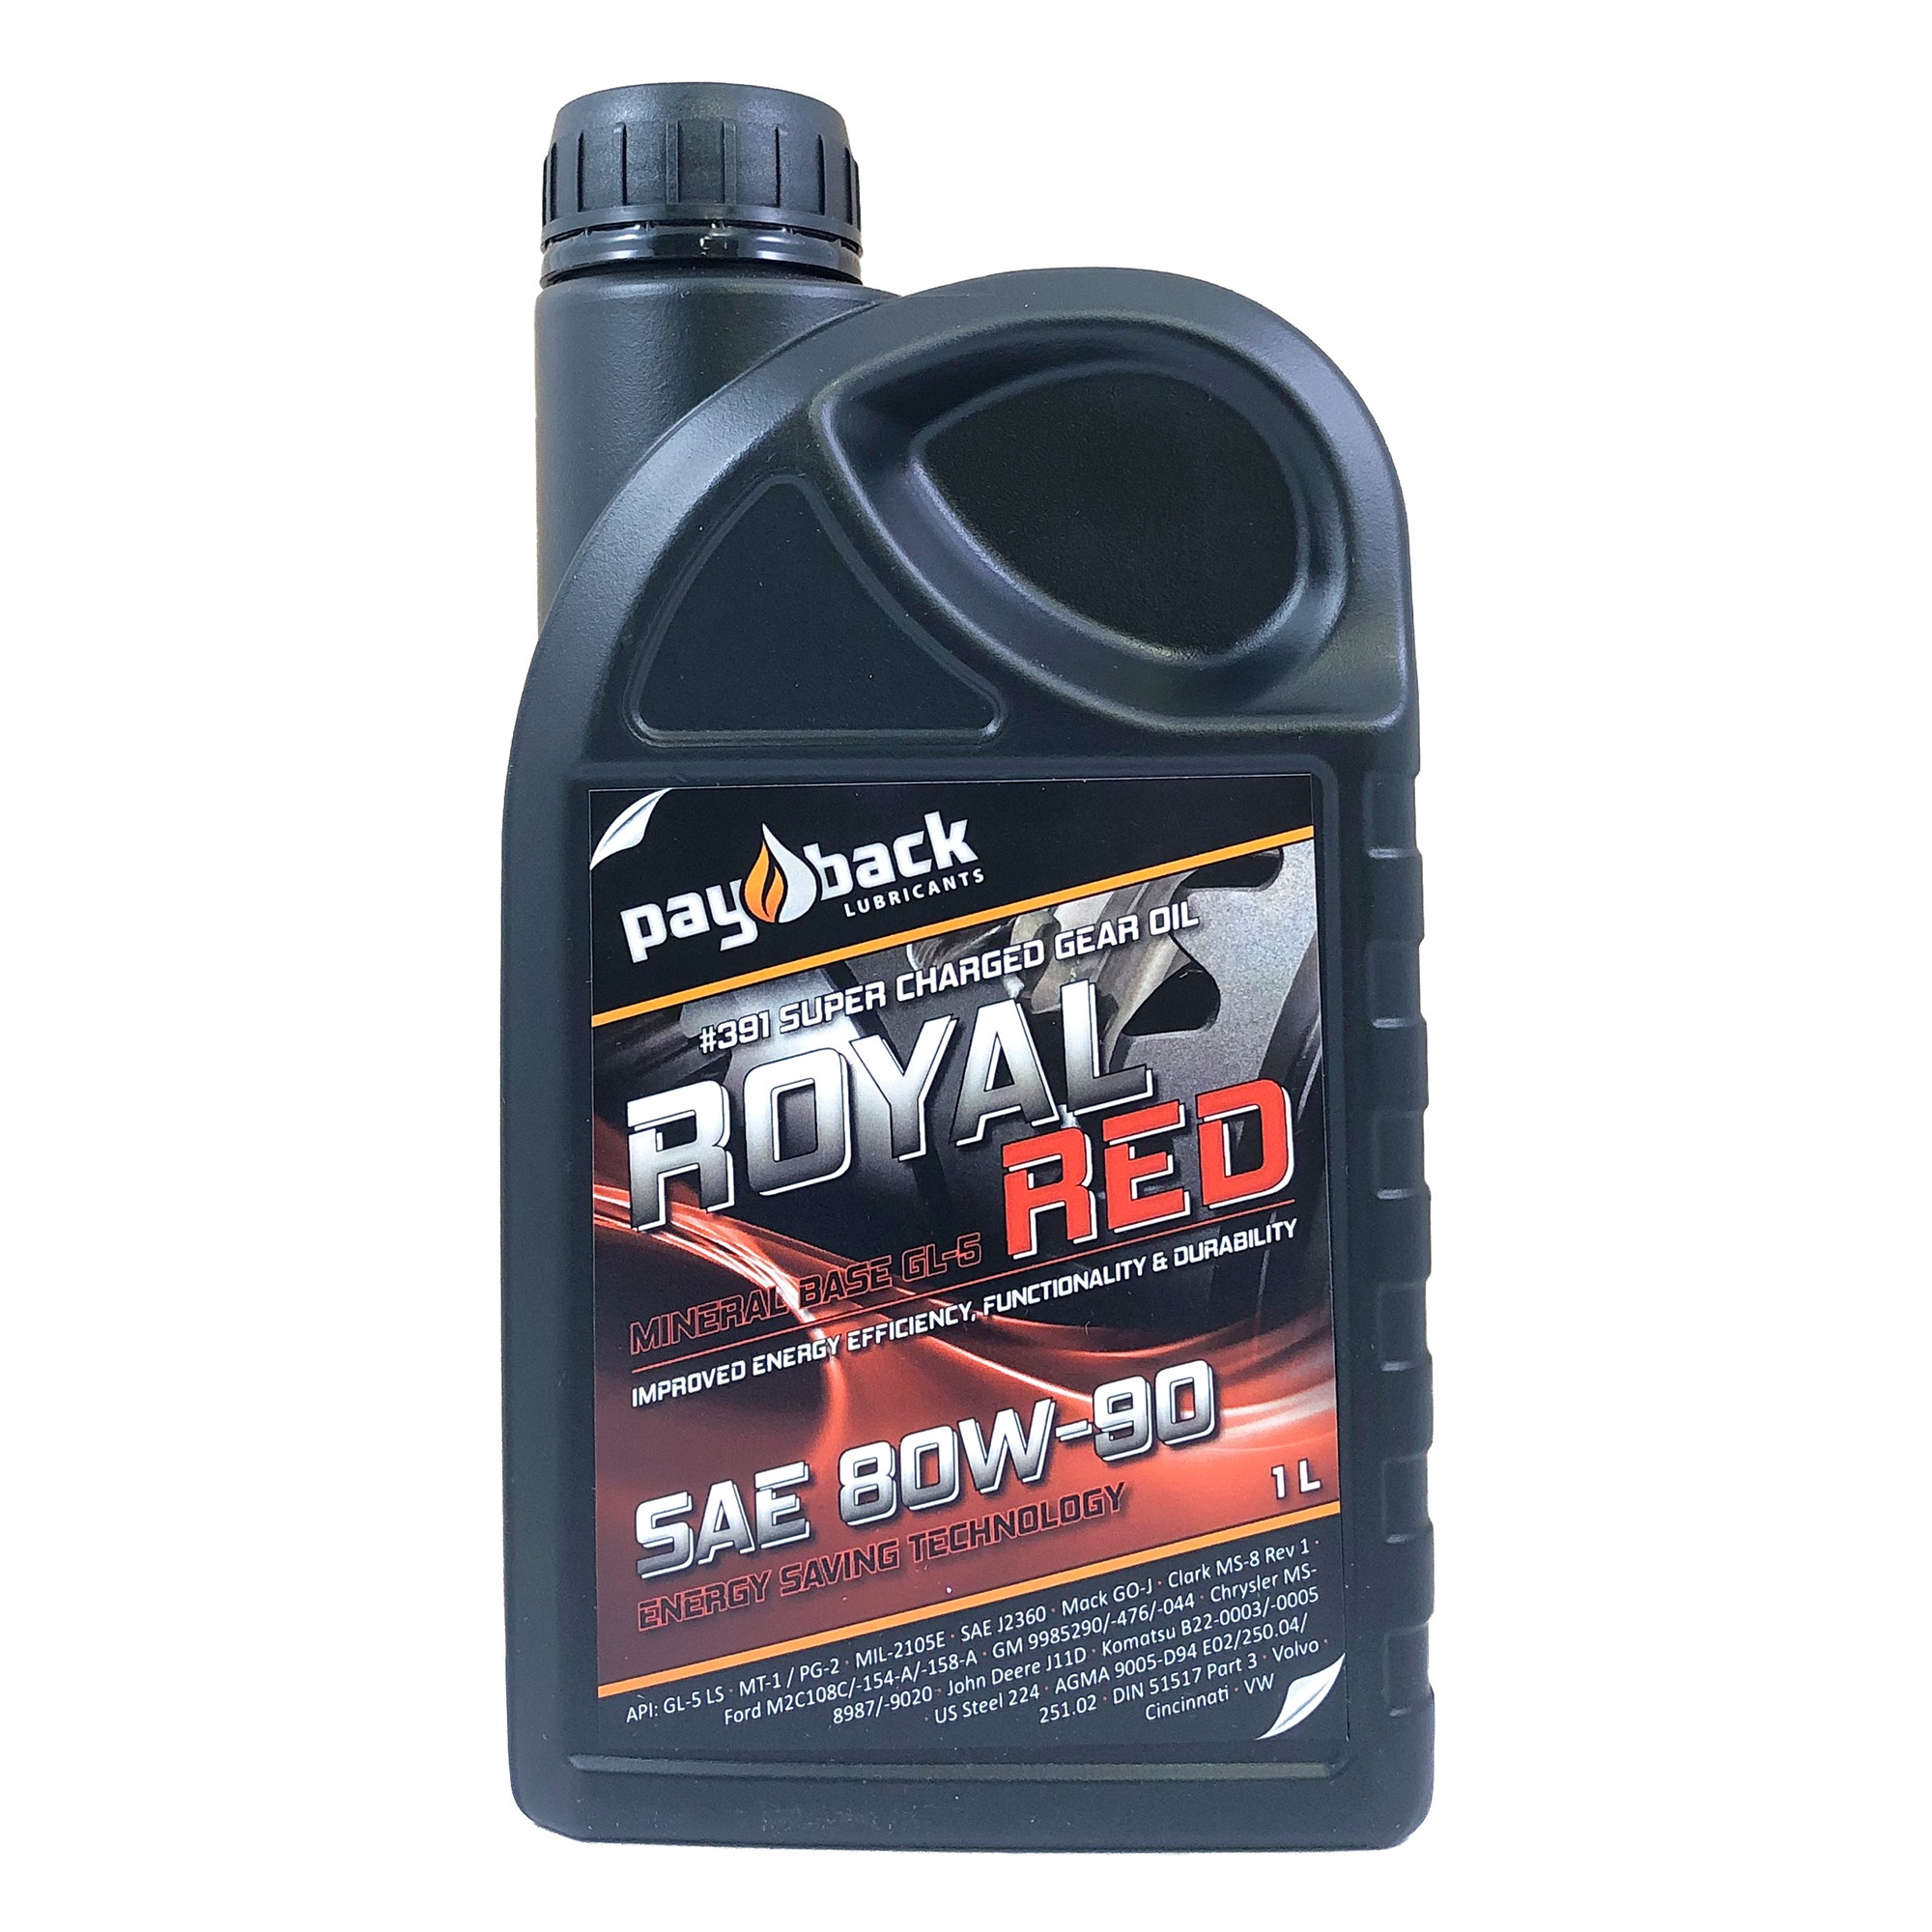 PAYBACK ROYAL RED 80w90 MINERAL API GL-5 LS 1-liter